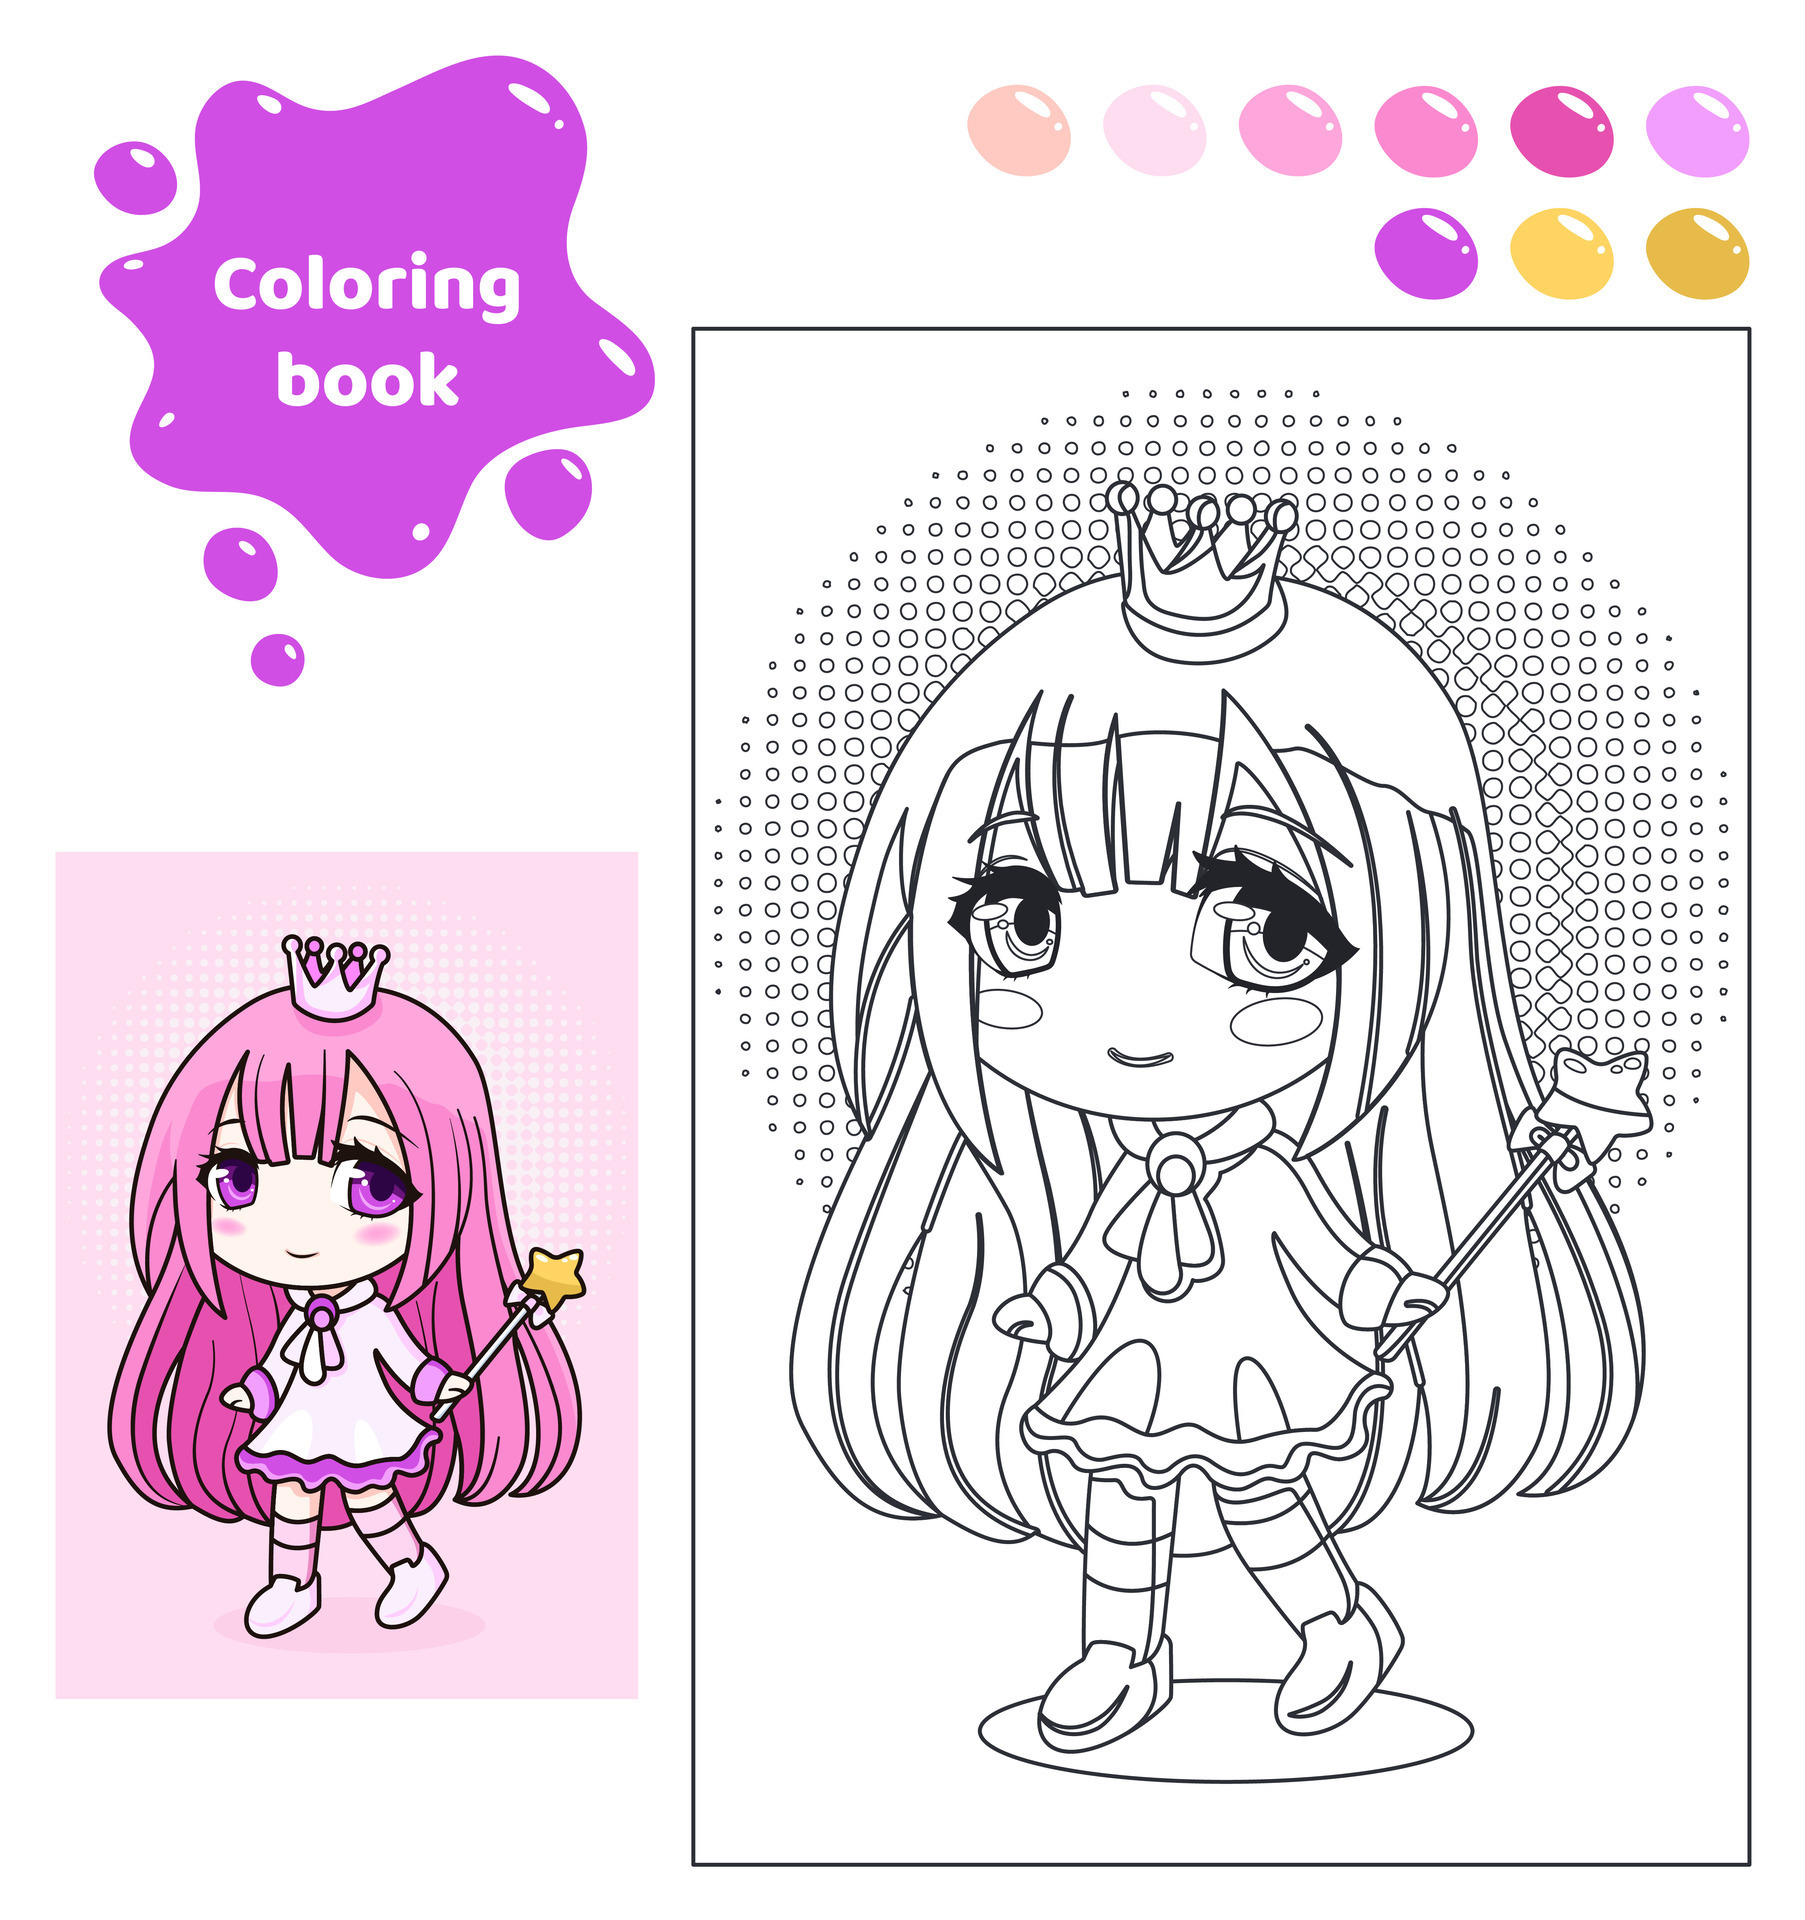 Flower Girl Coloring Page  Color drawing art, Manga coloring book